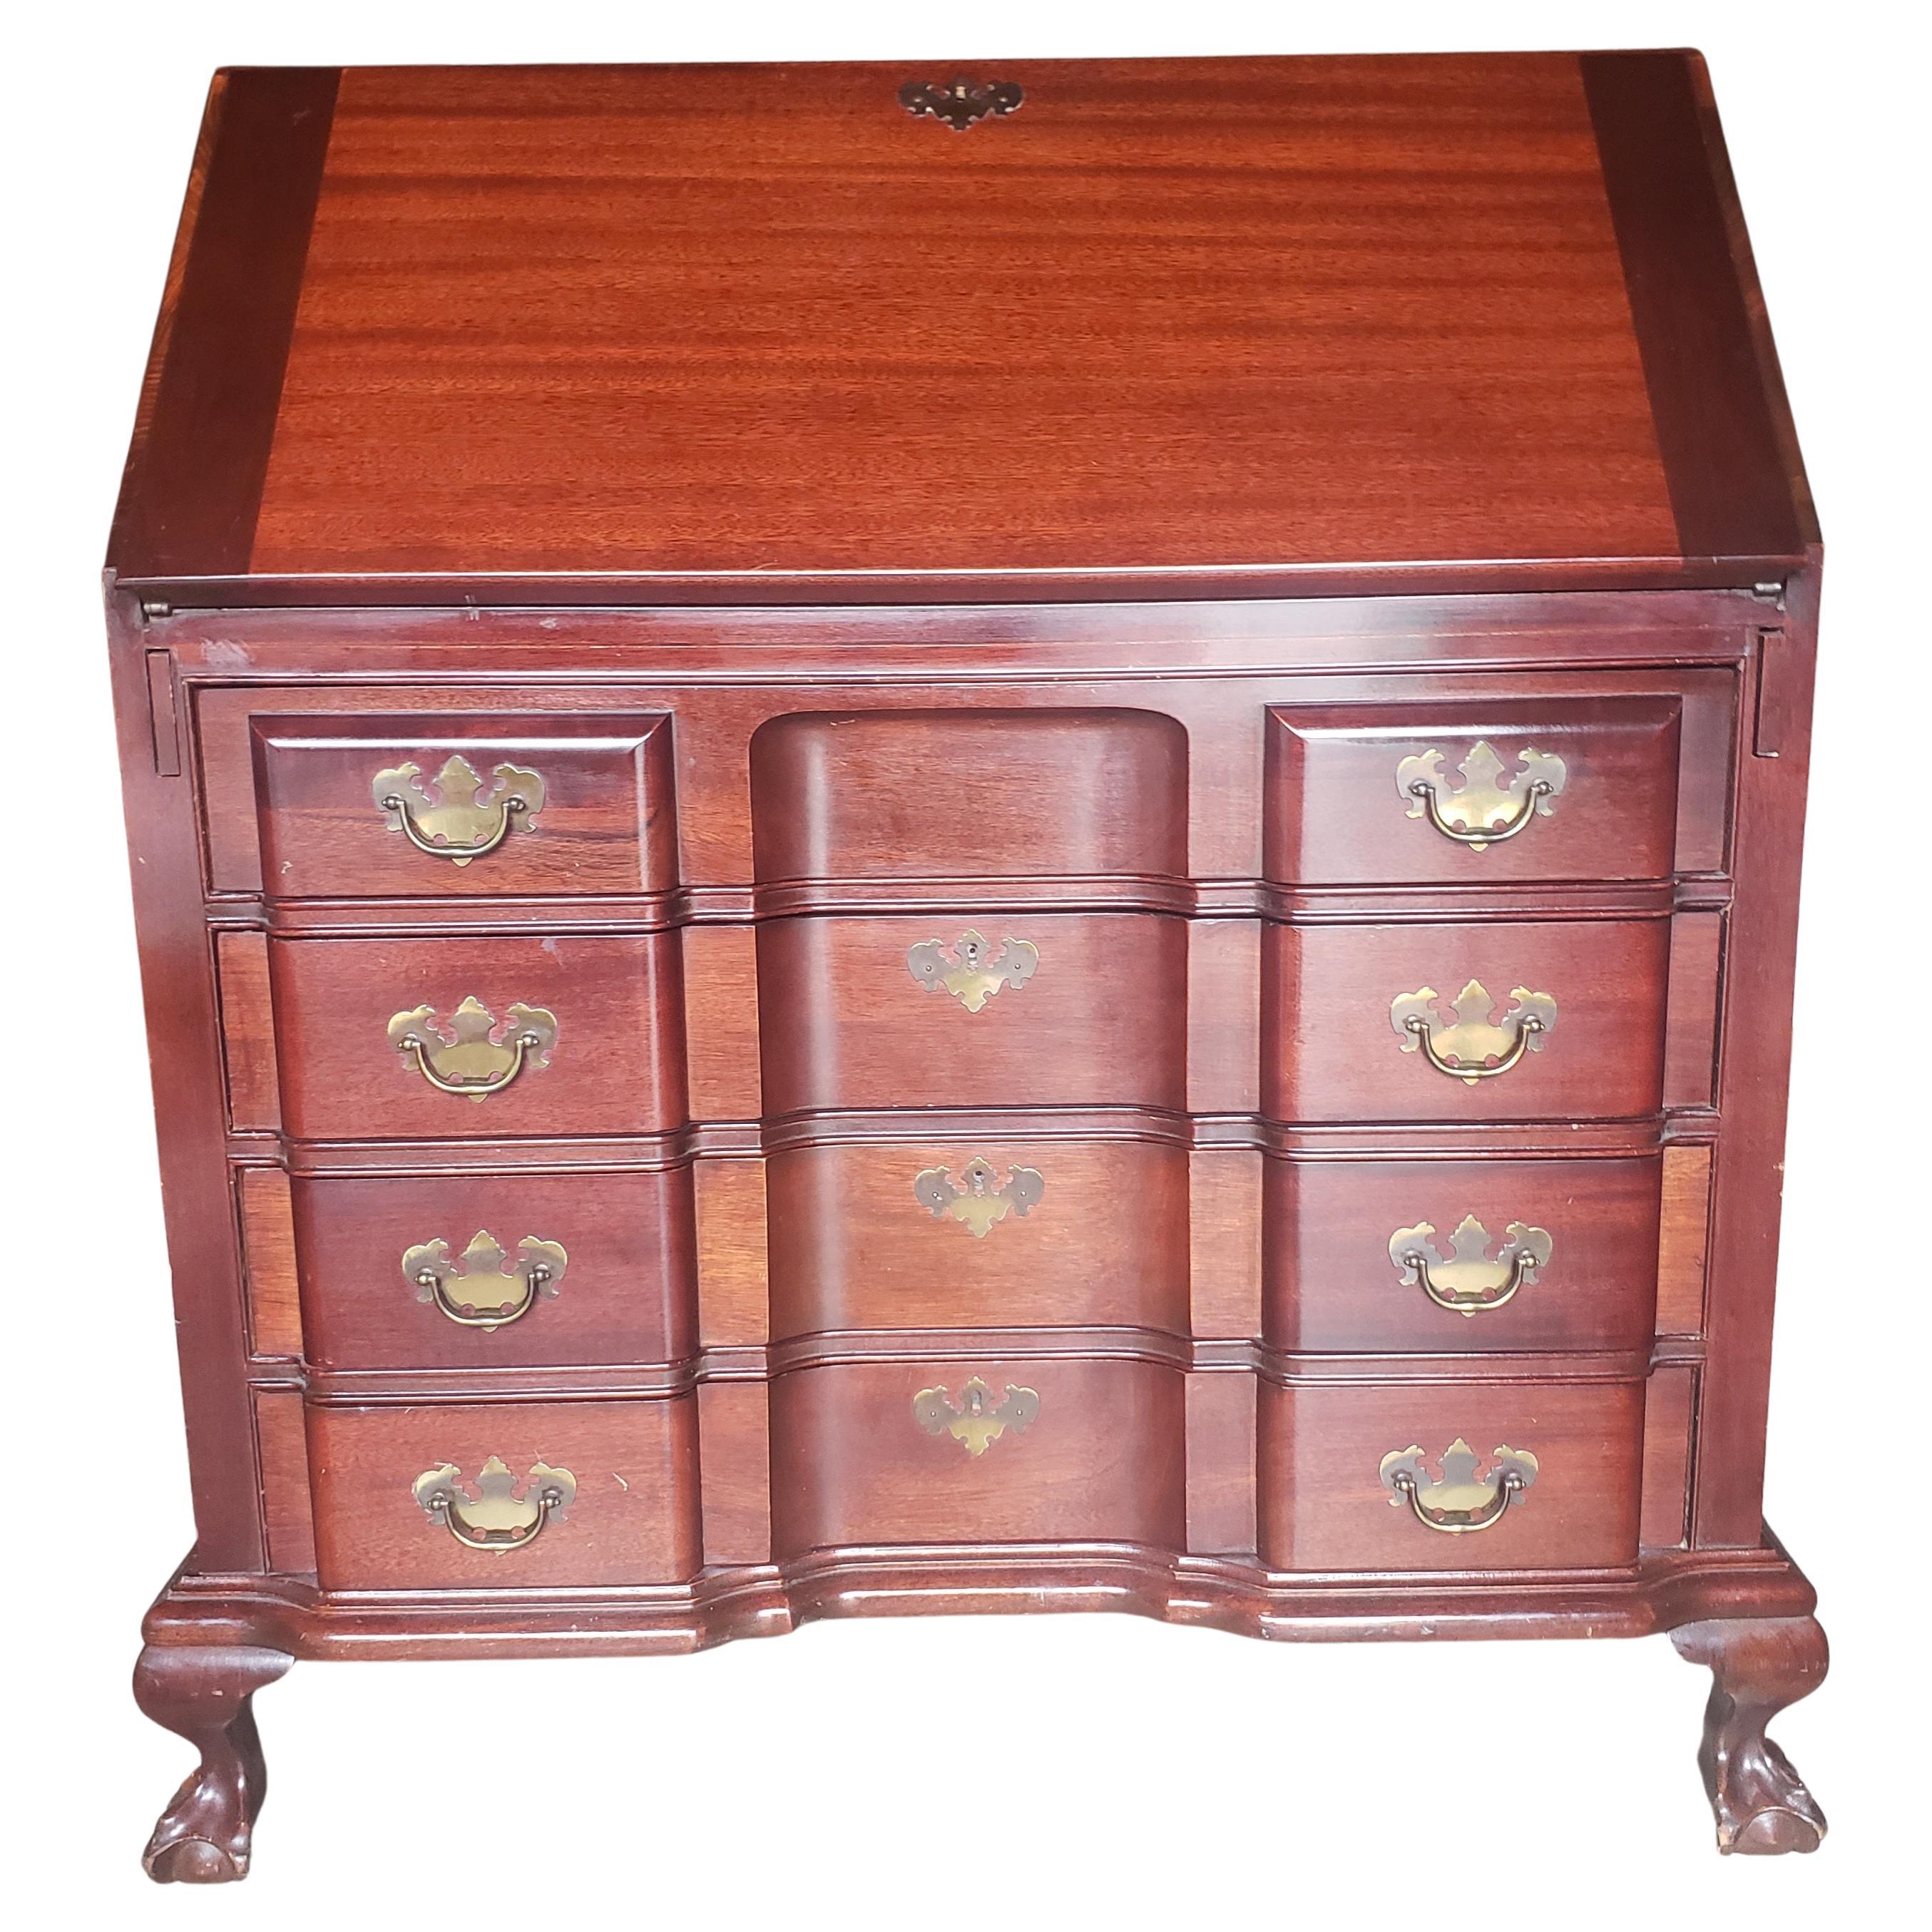 Maddox Refinished Red Mahogany Block / Slant Front Secretary Desk with Key For Sale